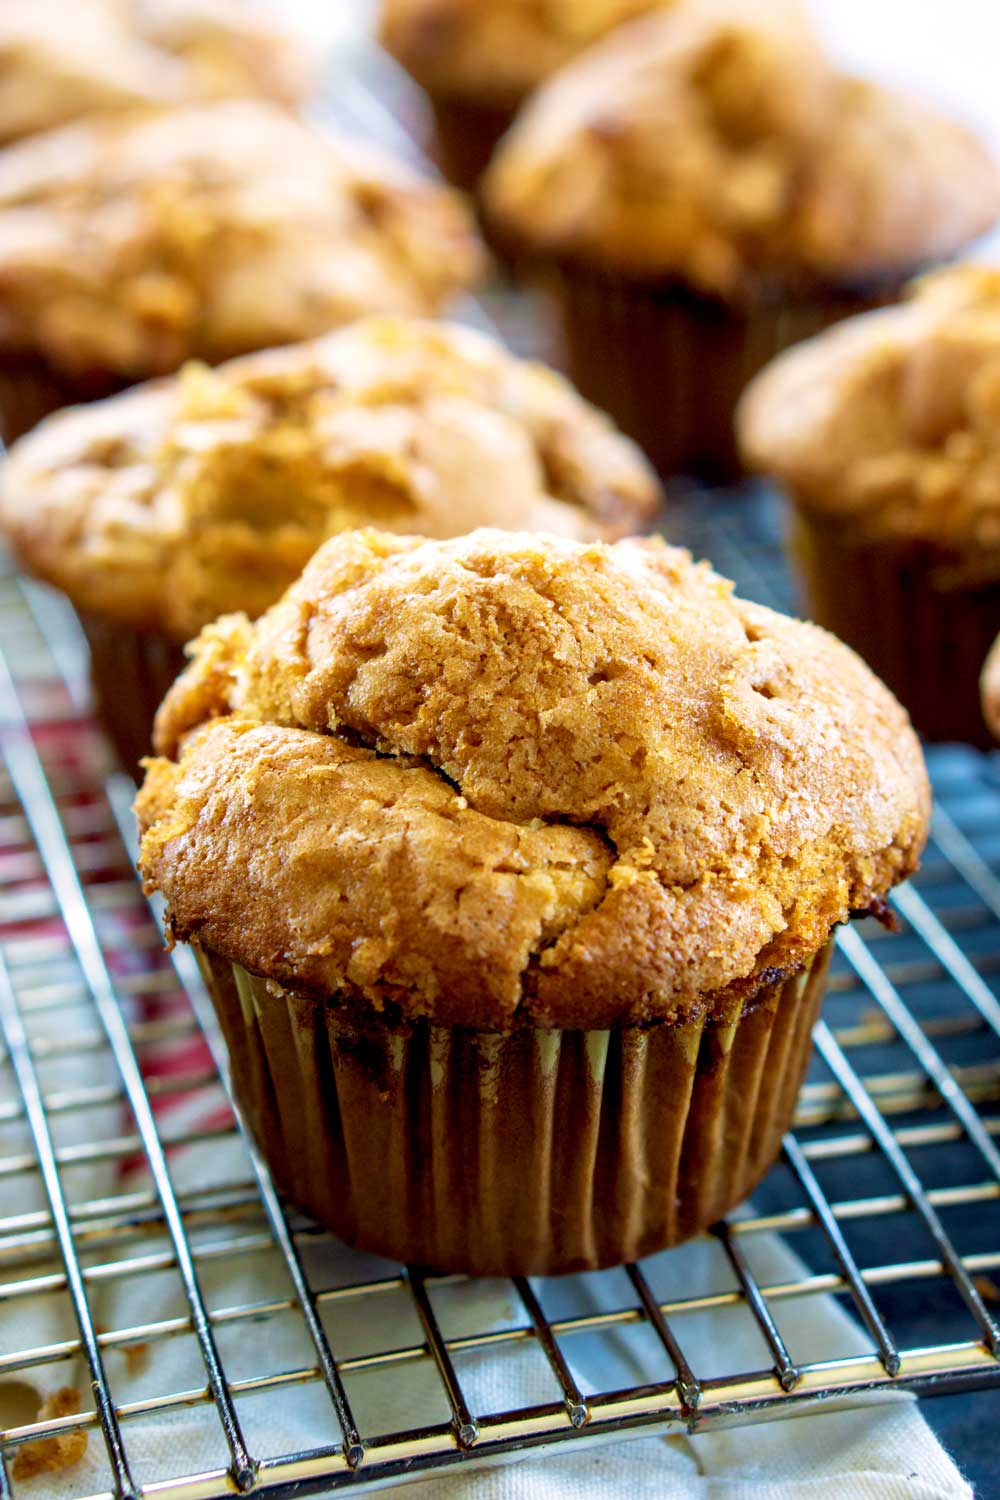 Simply put, this is the best apple muffin recipe out there!